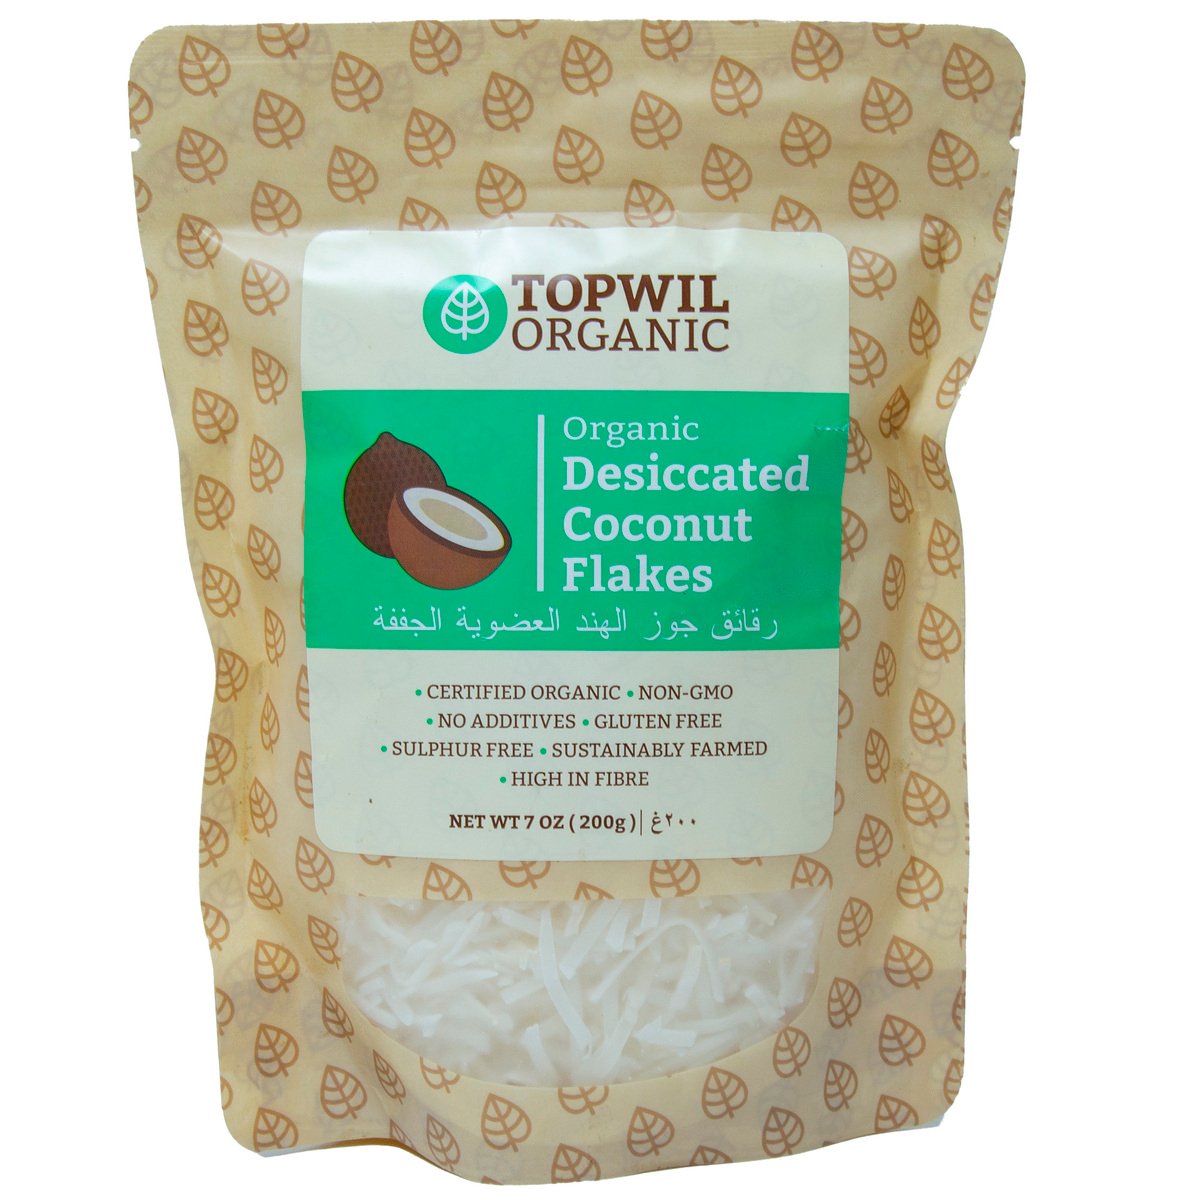 Topwil Organic Desiccated Coconut Flakes 200g